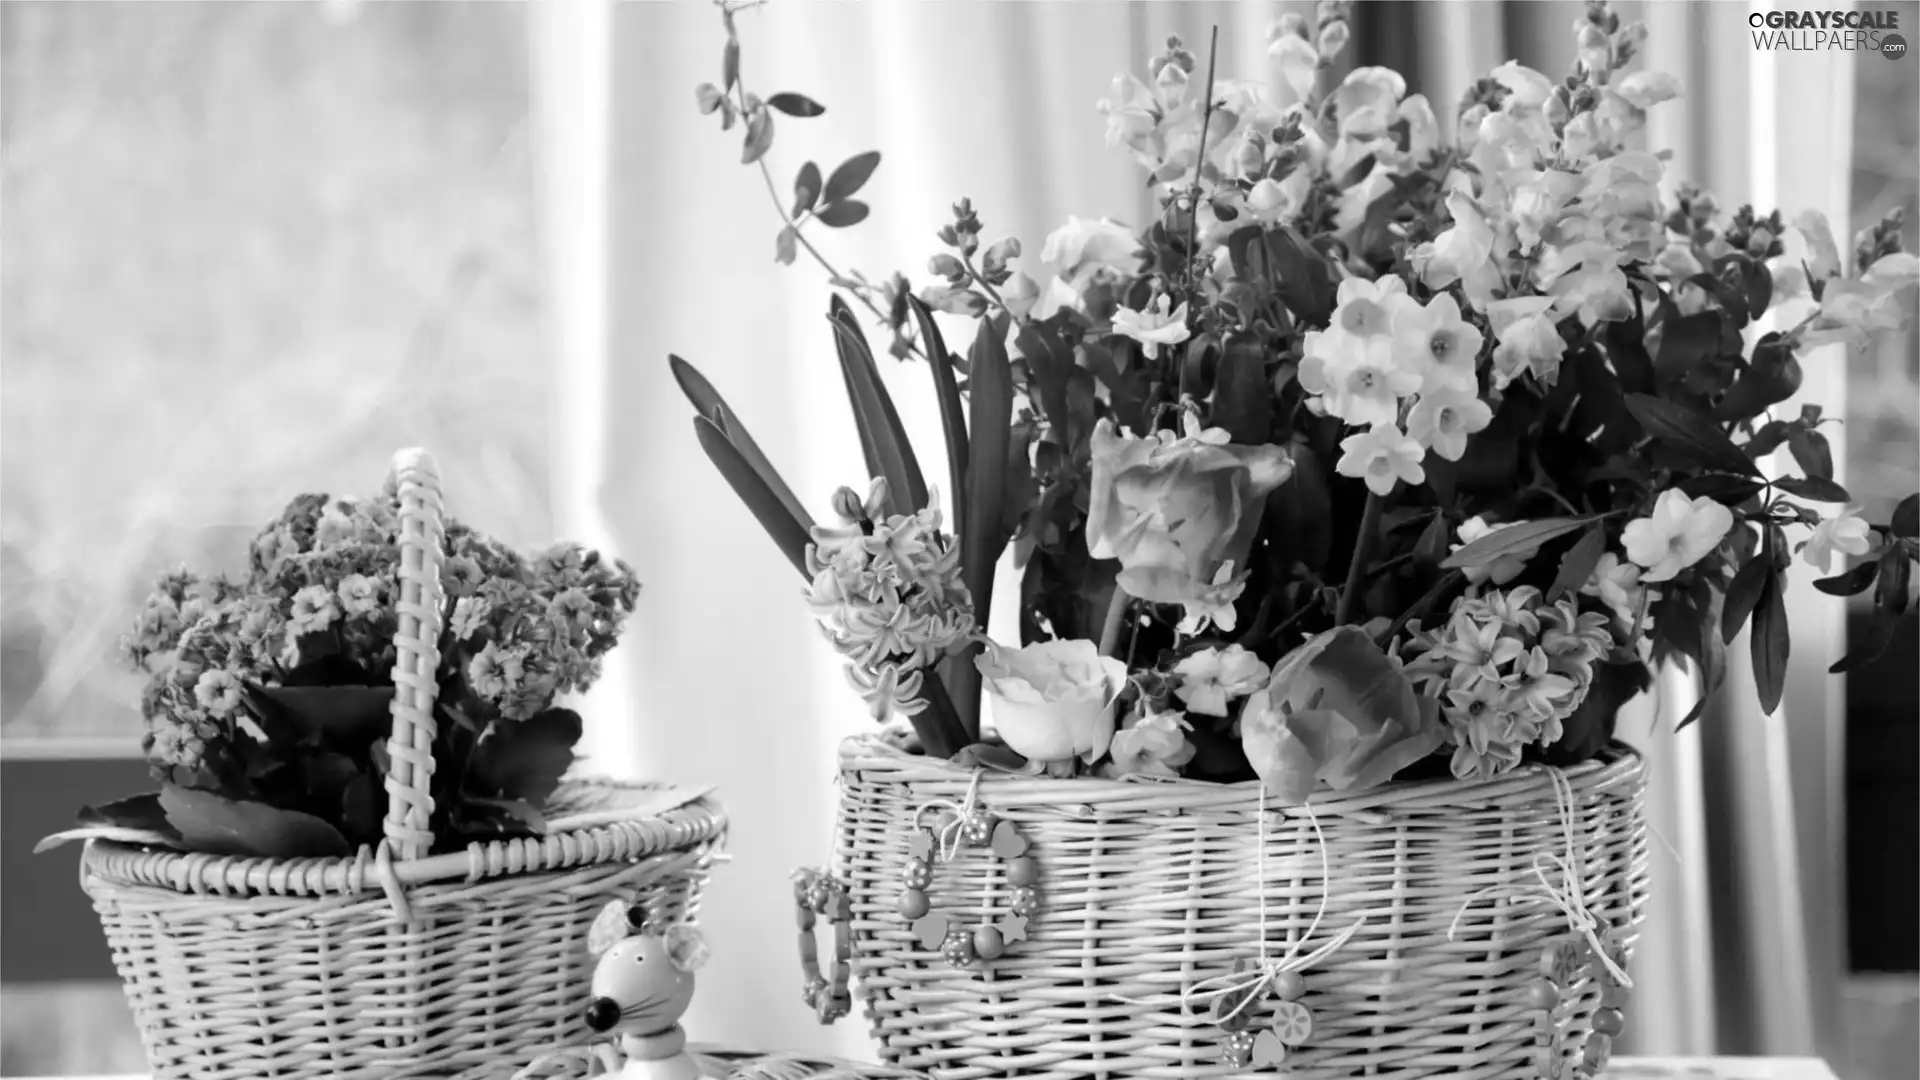 Baskets, Two cars, Bouquets, Flowers, Freesias, roses, Tulips, Daffodils, Hyacinths